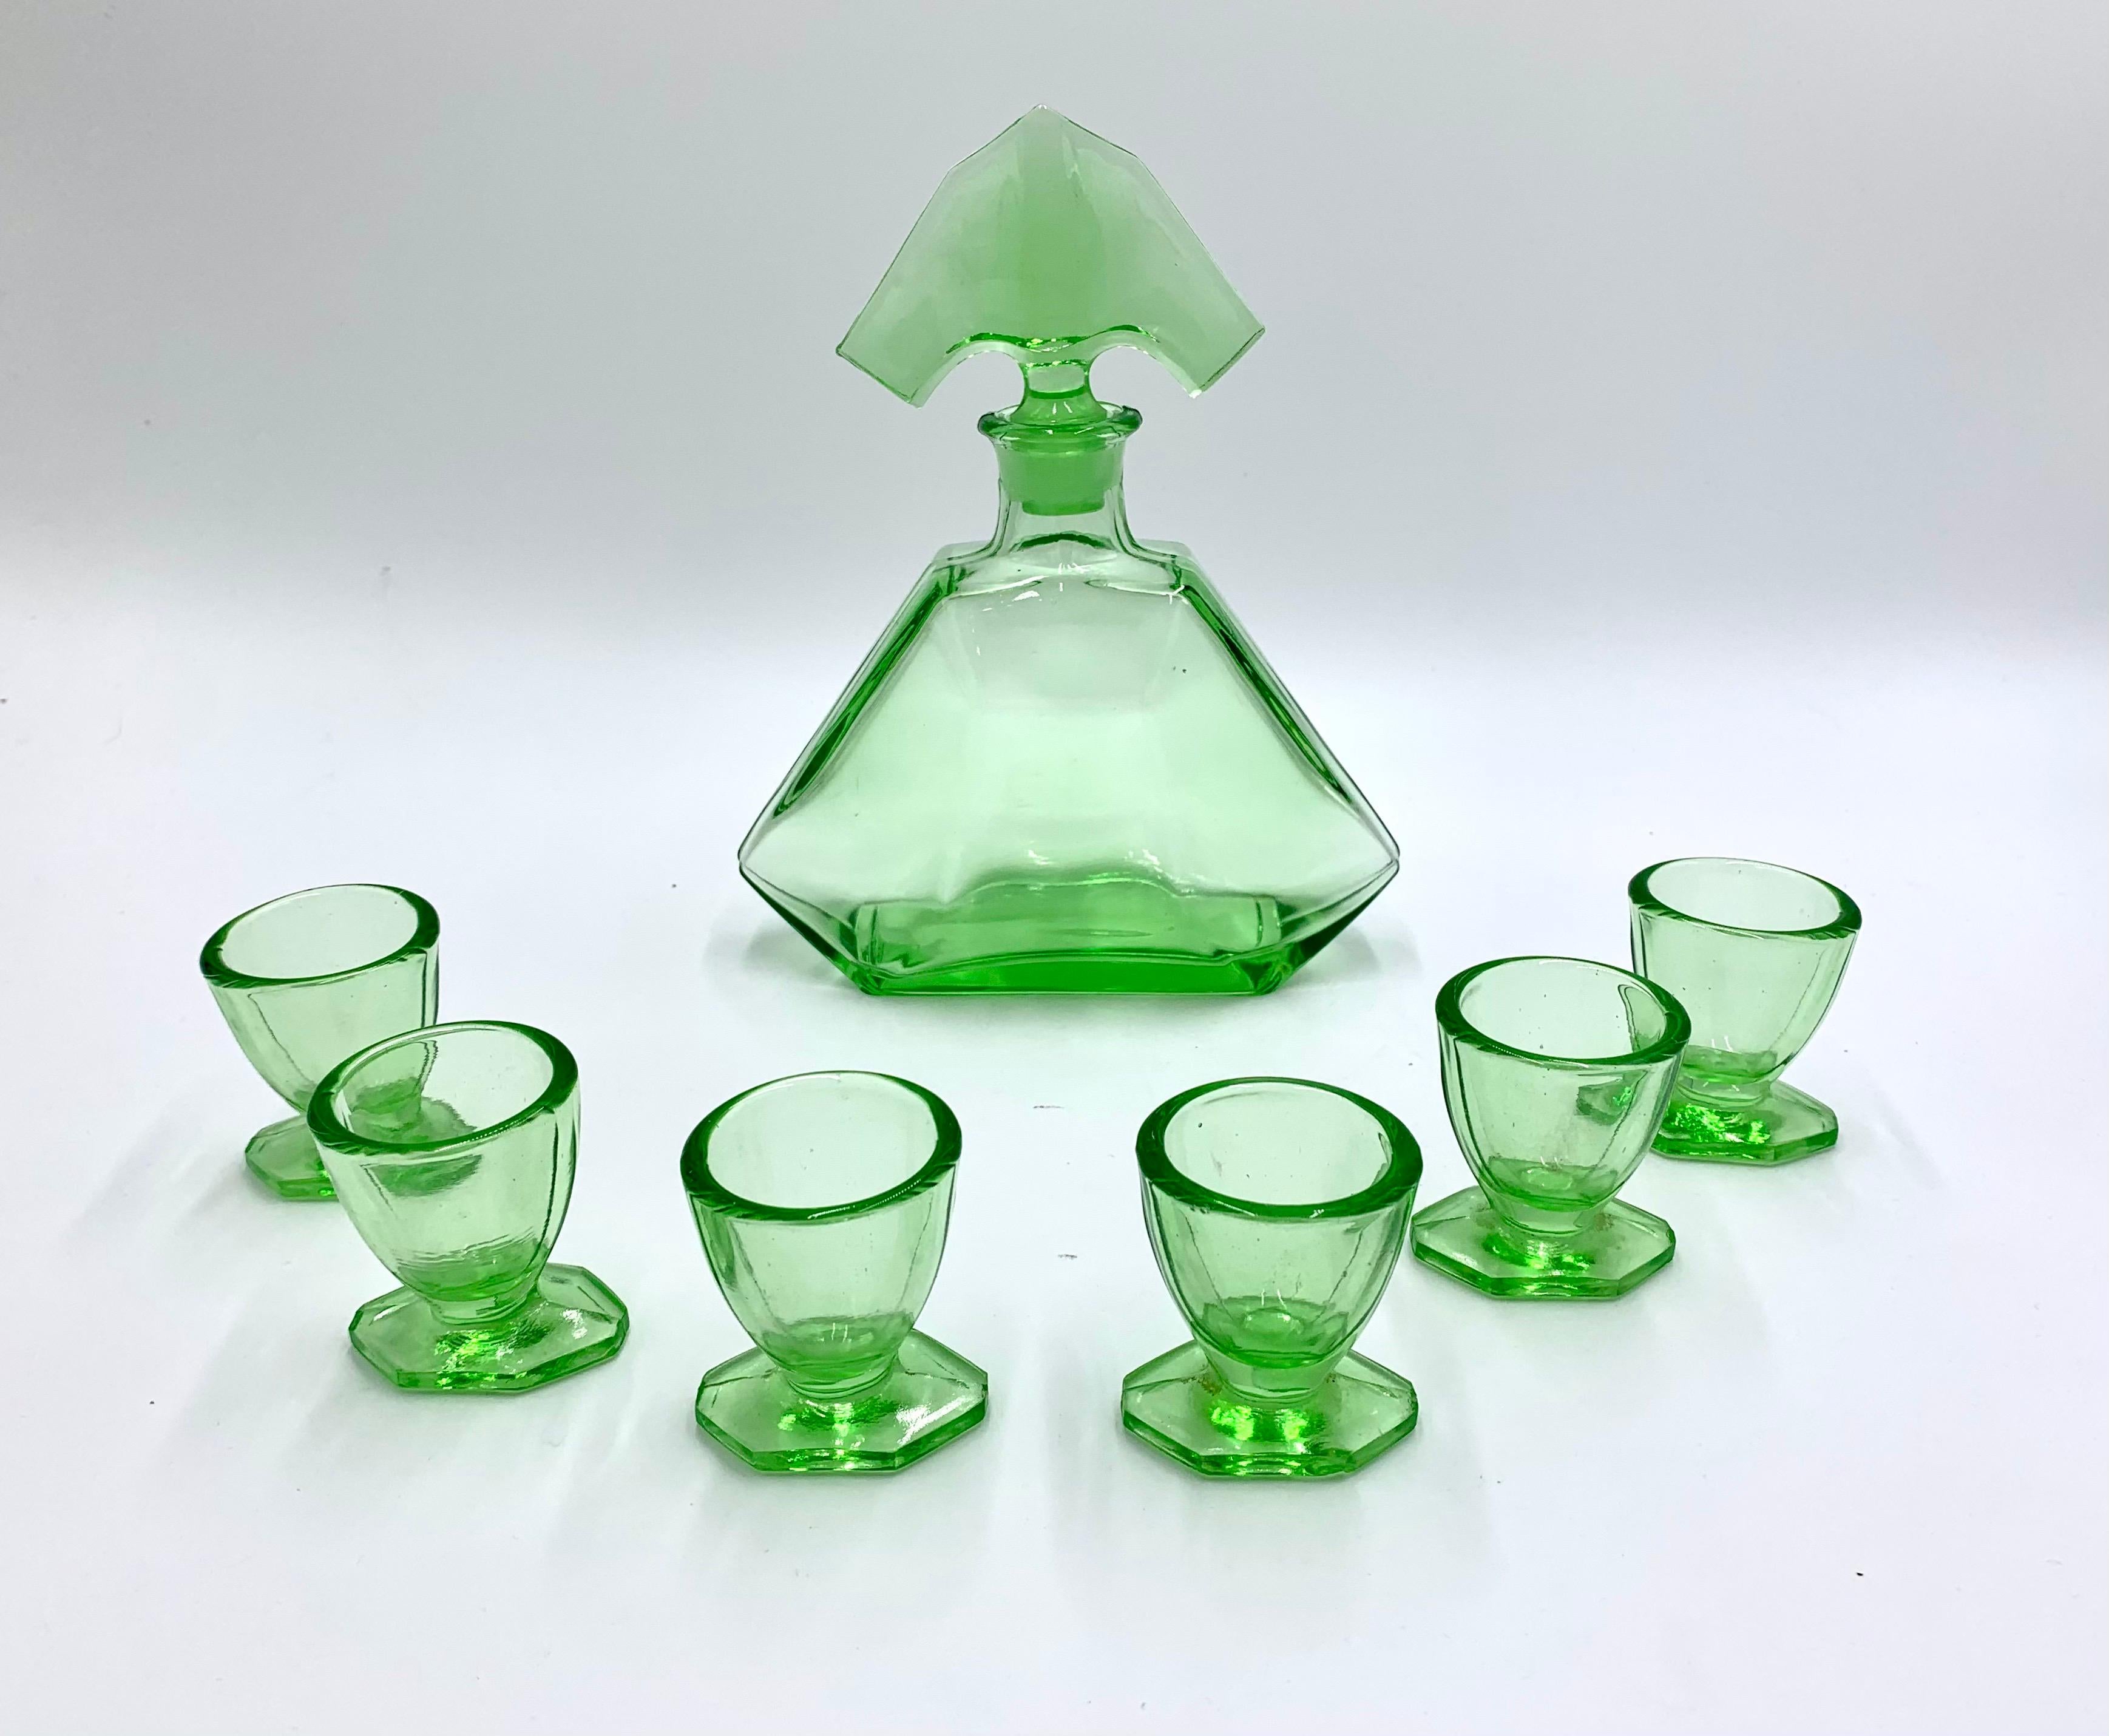 Art Deco green glass vodka or liquor set consisting of a carafe with stopper and 6 shot glasses . 
Made in Czechoslovakia in 1930s. 
Used to store absinth
Very good condition. 
Measures: Carafe height 21cm width 7cm
Glass height 5,5cm diameter 5cm.